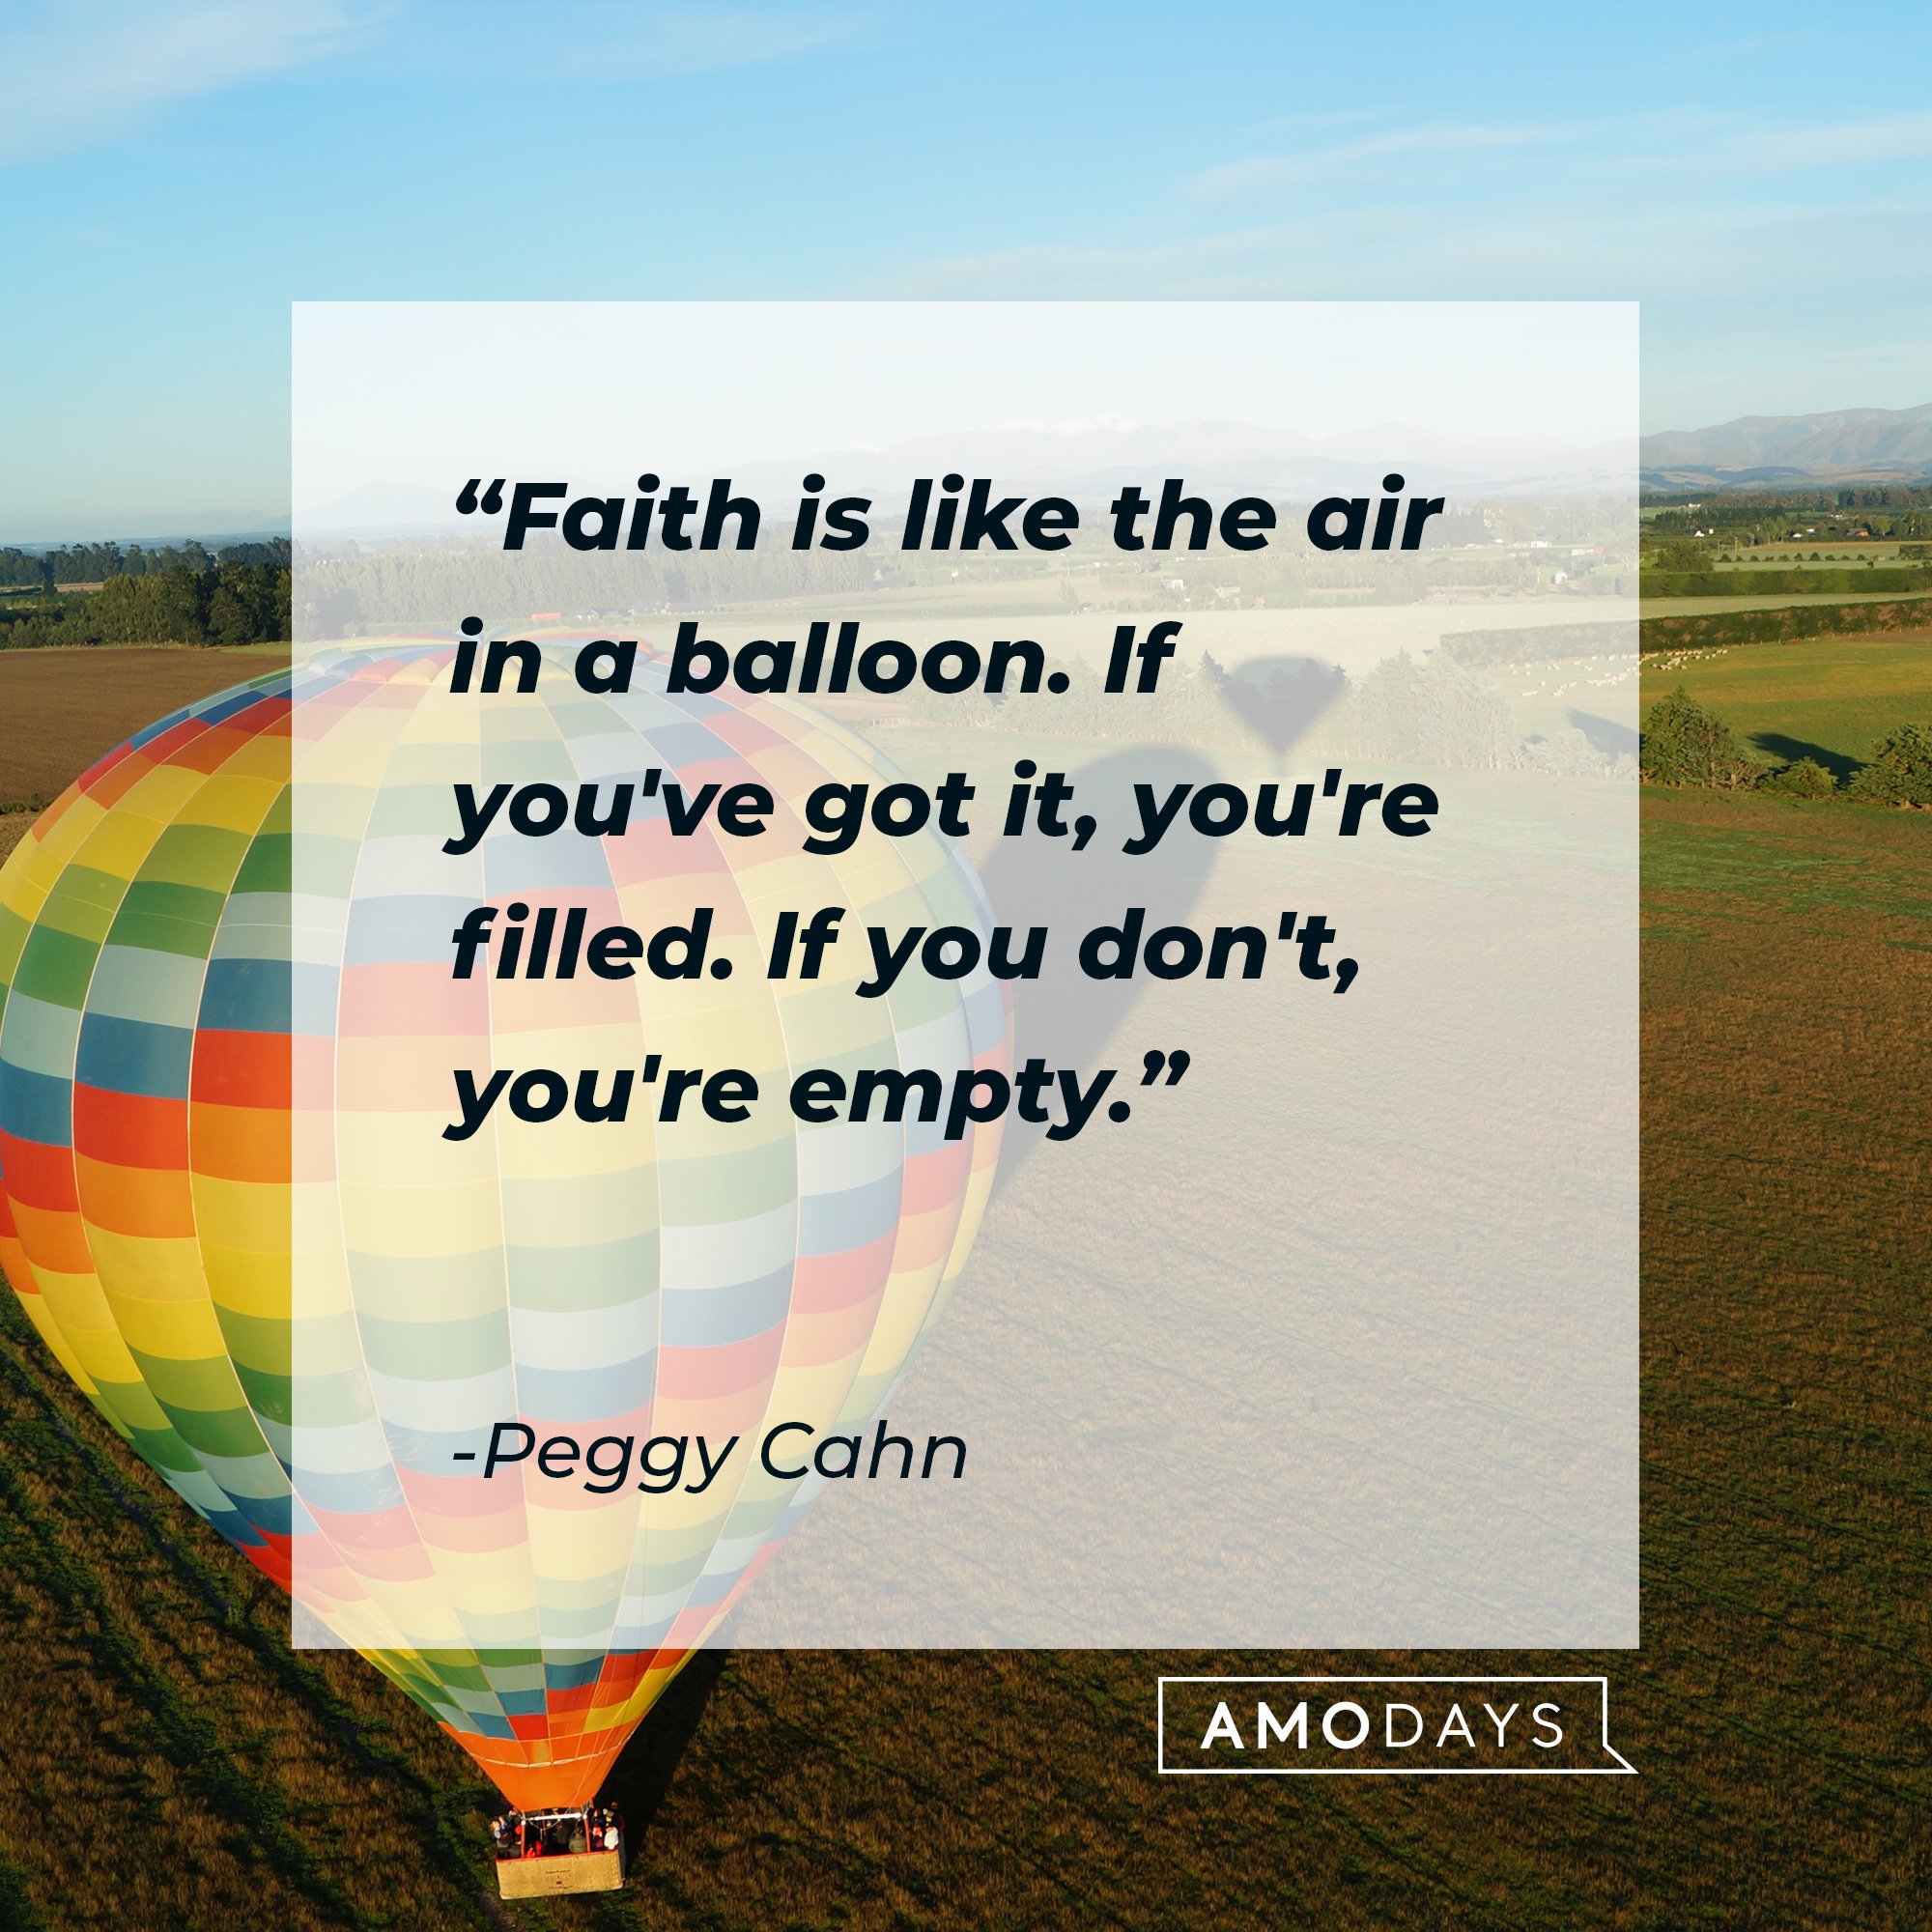 Peggy Cahn’s quote: "Faith is like the air in a balloon. If you've got it, you're filled. If you don't, you're empty." | Image: AmoDays 